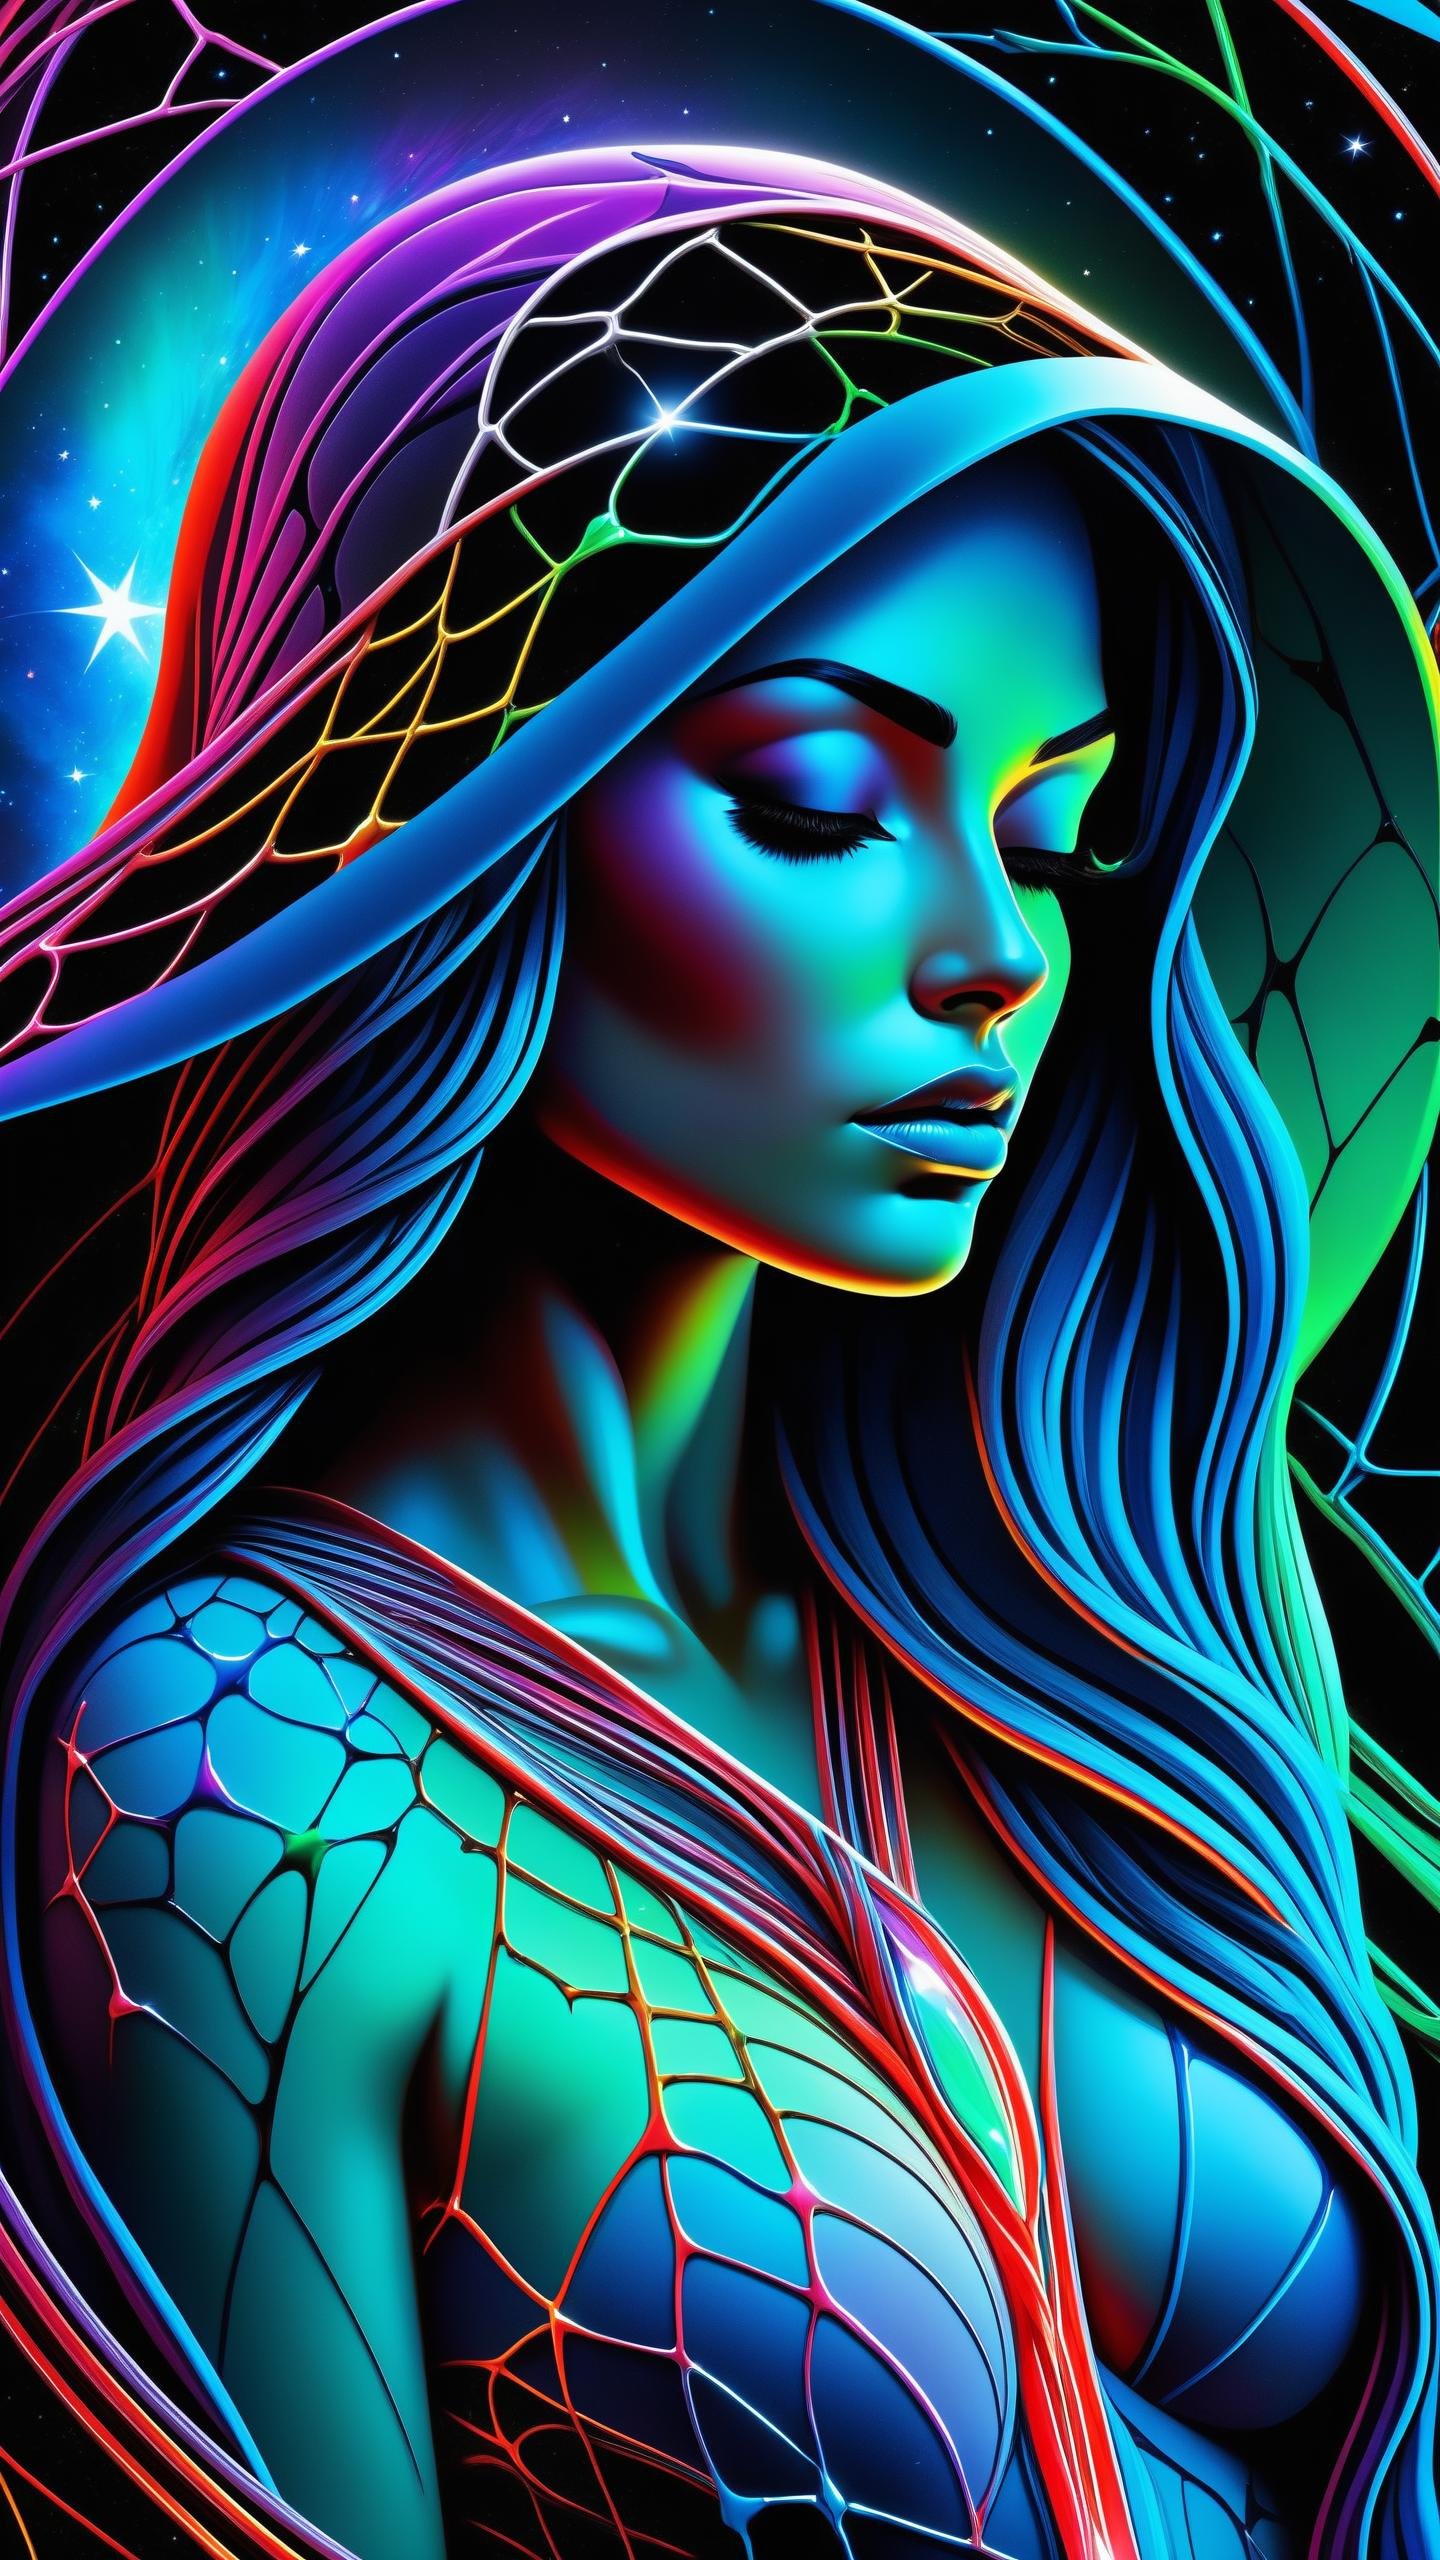 cartoon style, masterpiece, best quality, ultra high res, extremely detailed, (psychedelic art:1.4), woman, veil, visually stunning, beautiful, award-winning illustration, cosmic space background, ethereal atmosphere, ultra quality, beautiful girl, cosmical concept, rainbow strings, rainbow skin, rainbow bloody veins growing and intertwining out of the darkness, nailed wire, oozing thick blue blood, sharp neon, veins growing and pumping blood, vascular networks growing, green veins everywhere, yin and yang, glowing space, glowing stars, infinity symbol